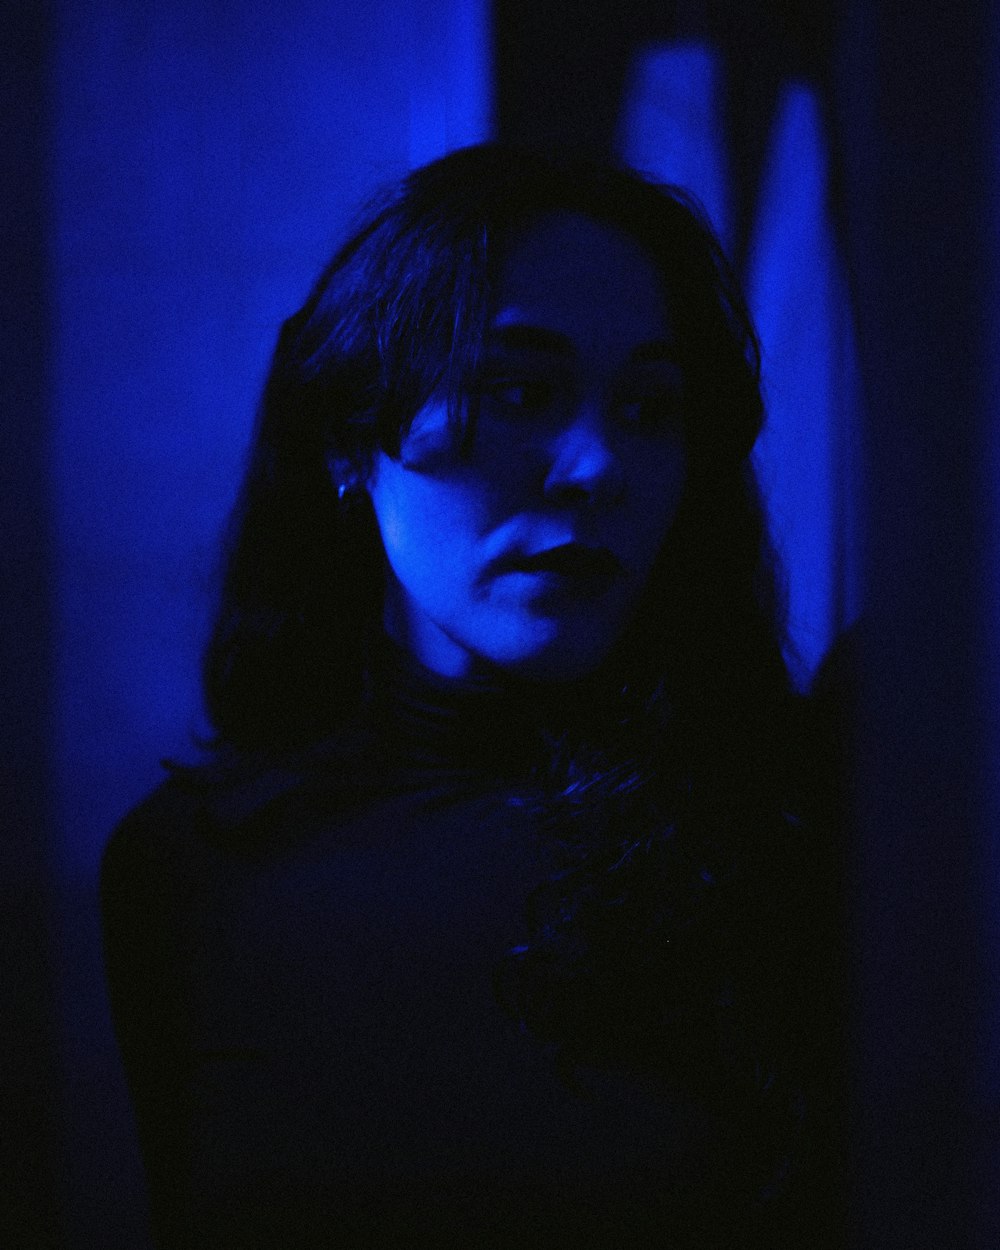 a woman standing in a dark room with a blue light